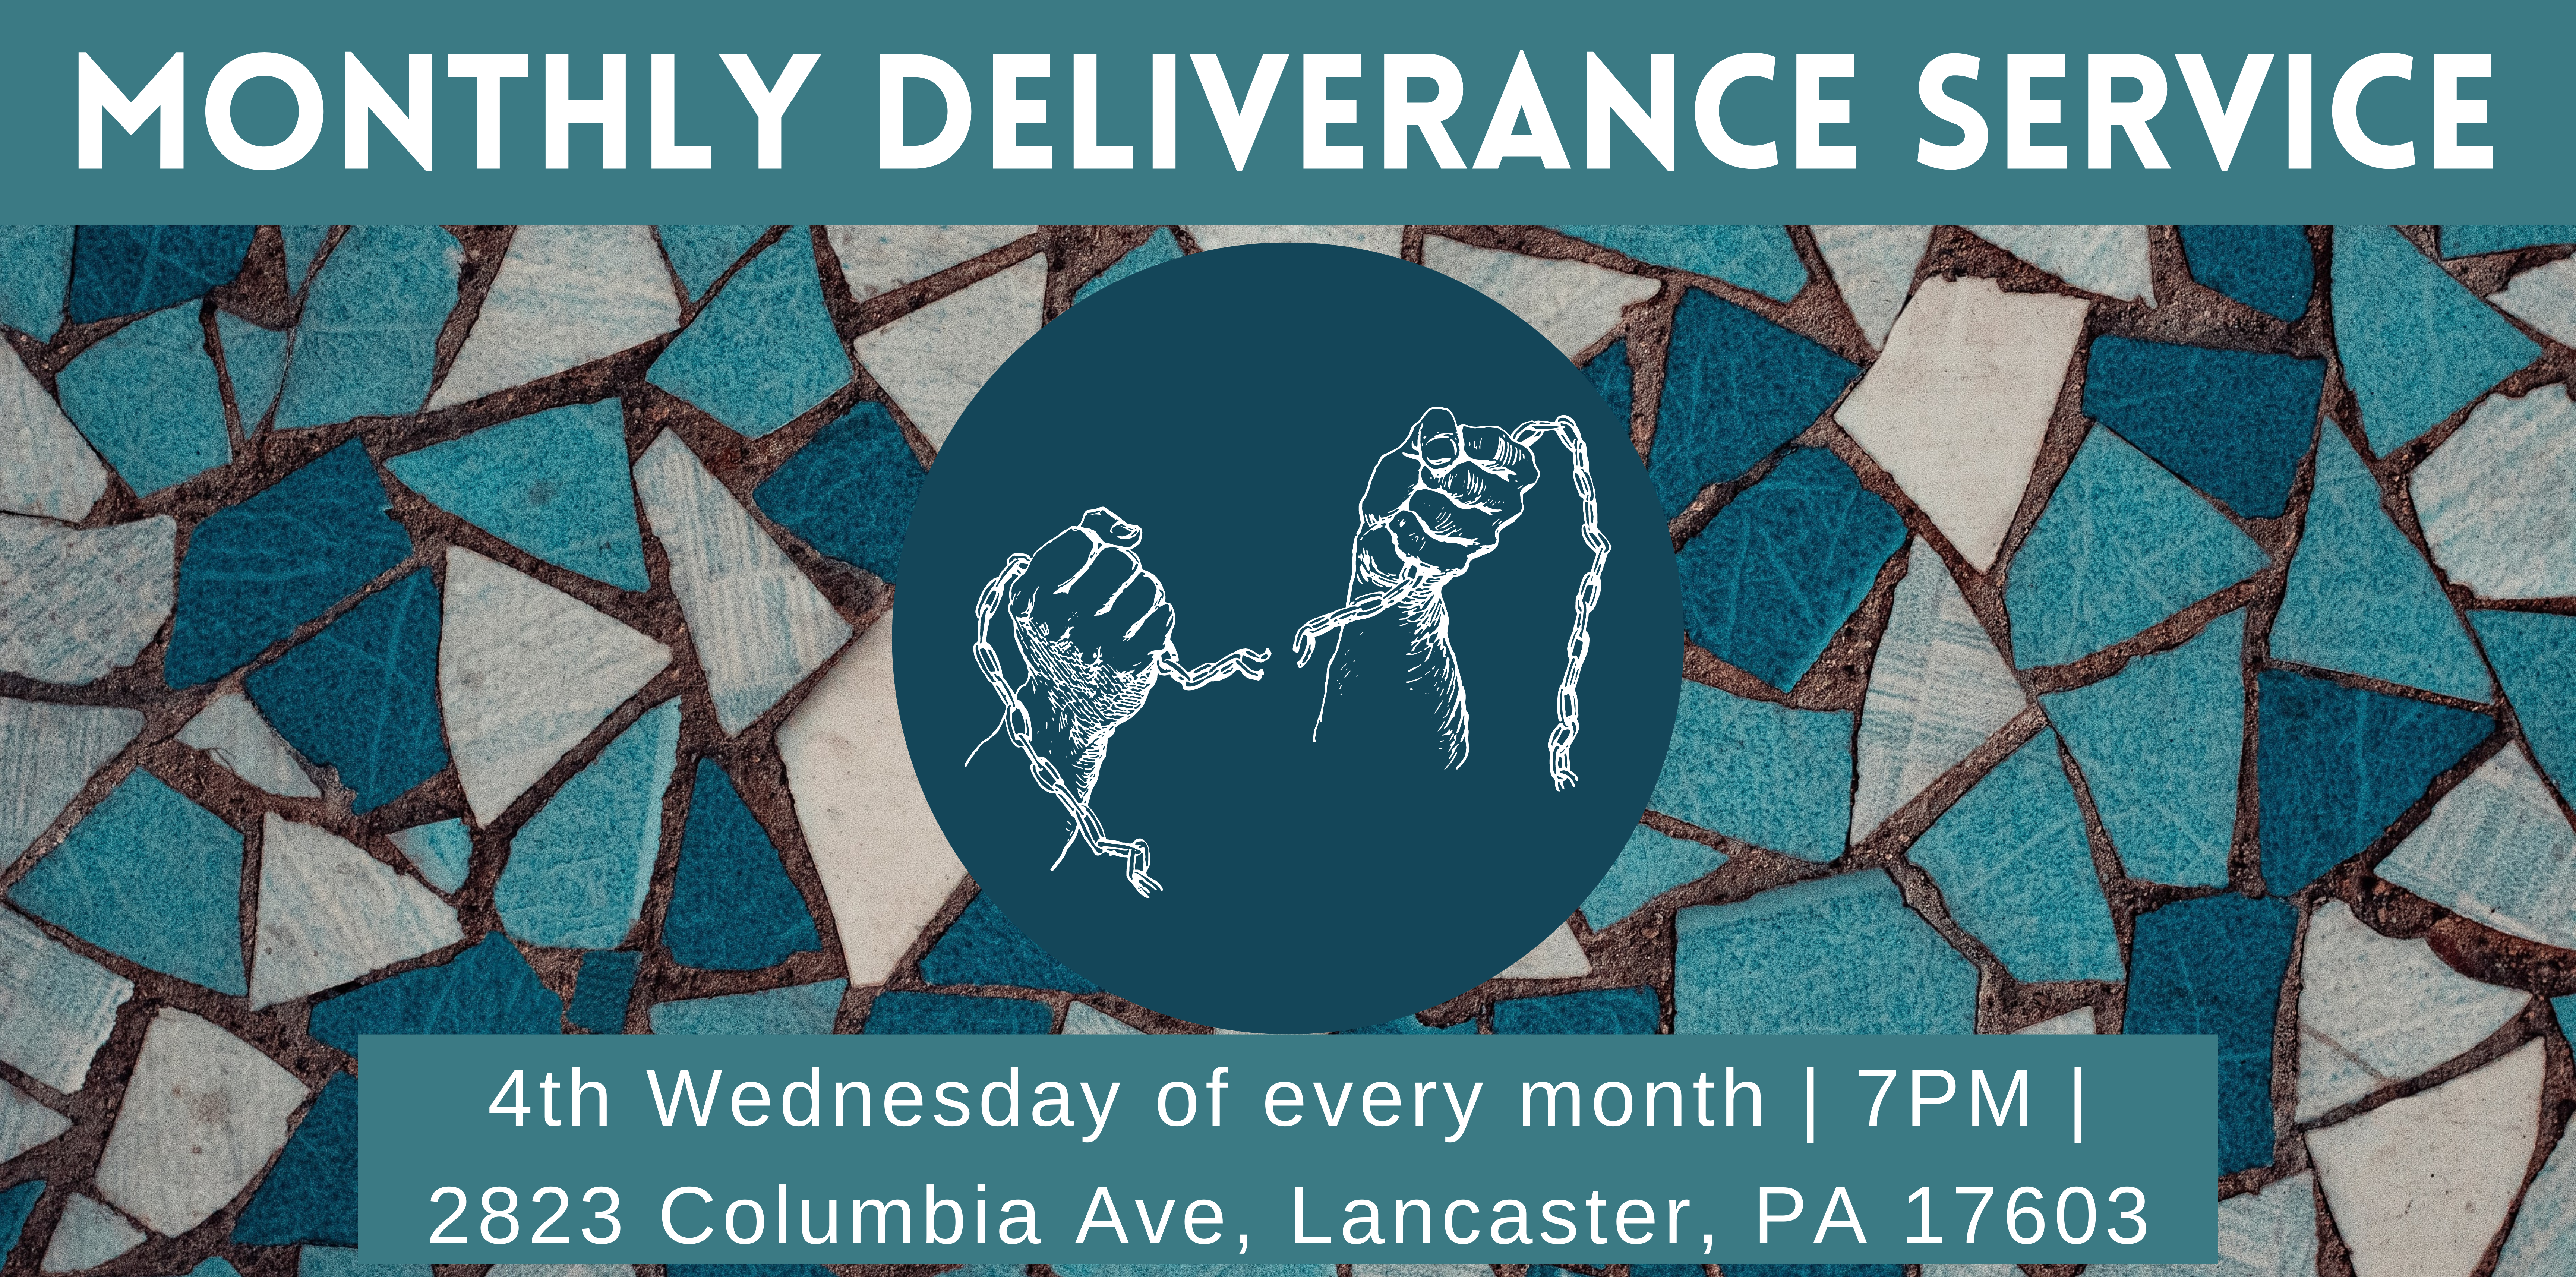 Monthly Deliverance Service – Every 4th Wednesday!